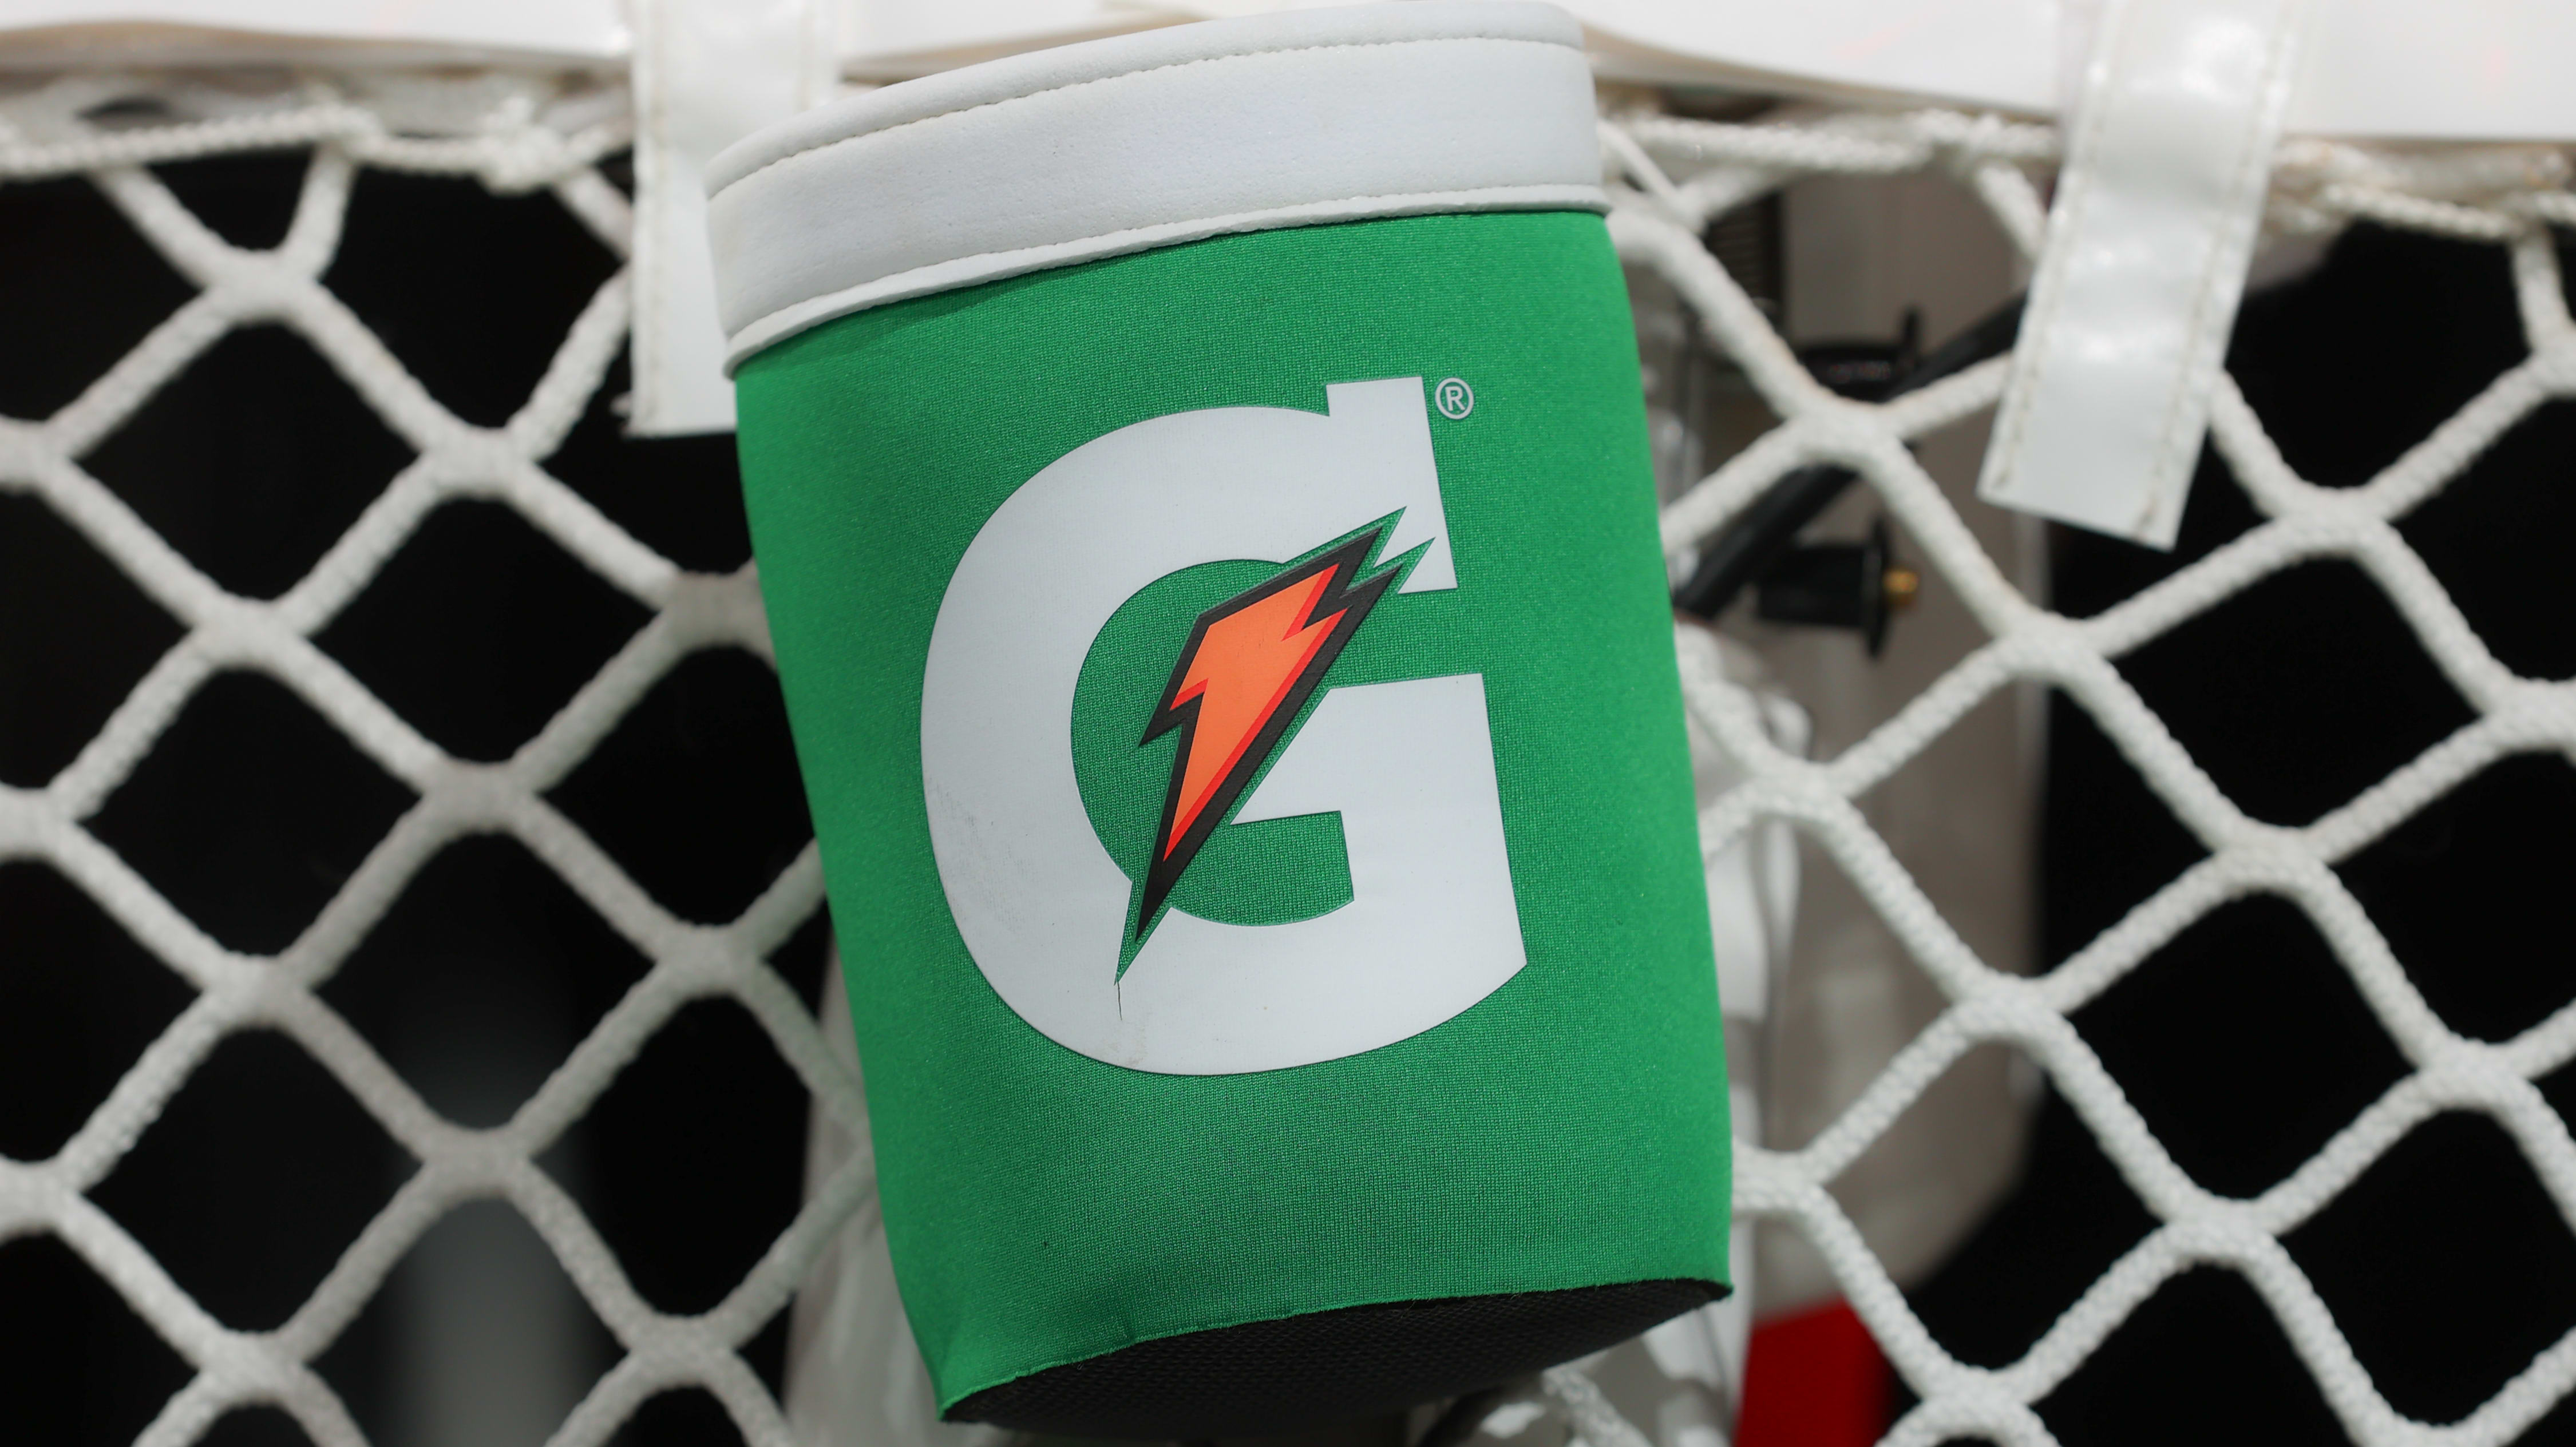 Gatorade Drops Sponsorship Deals With NHL and Others - white whale mktg's  blog